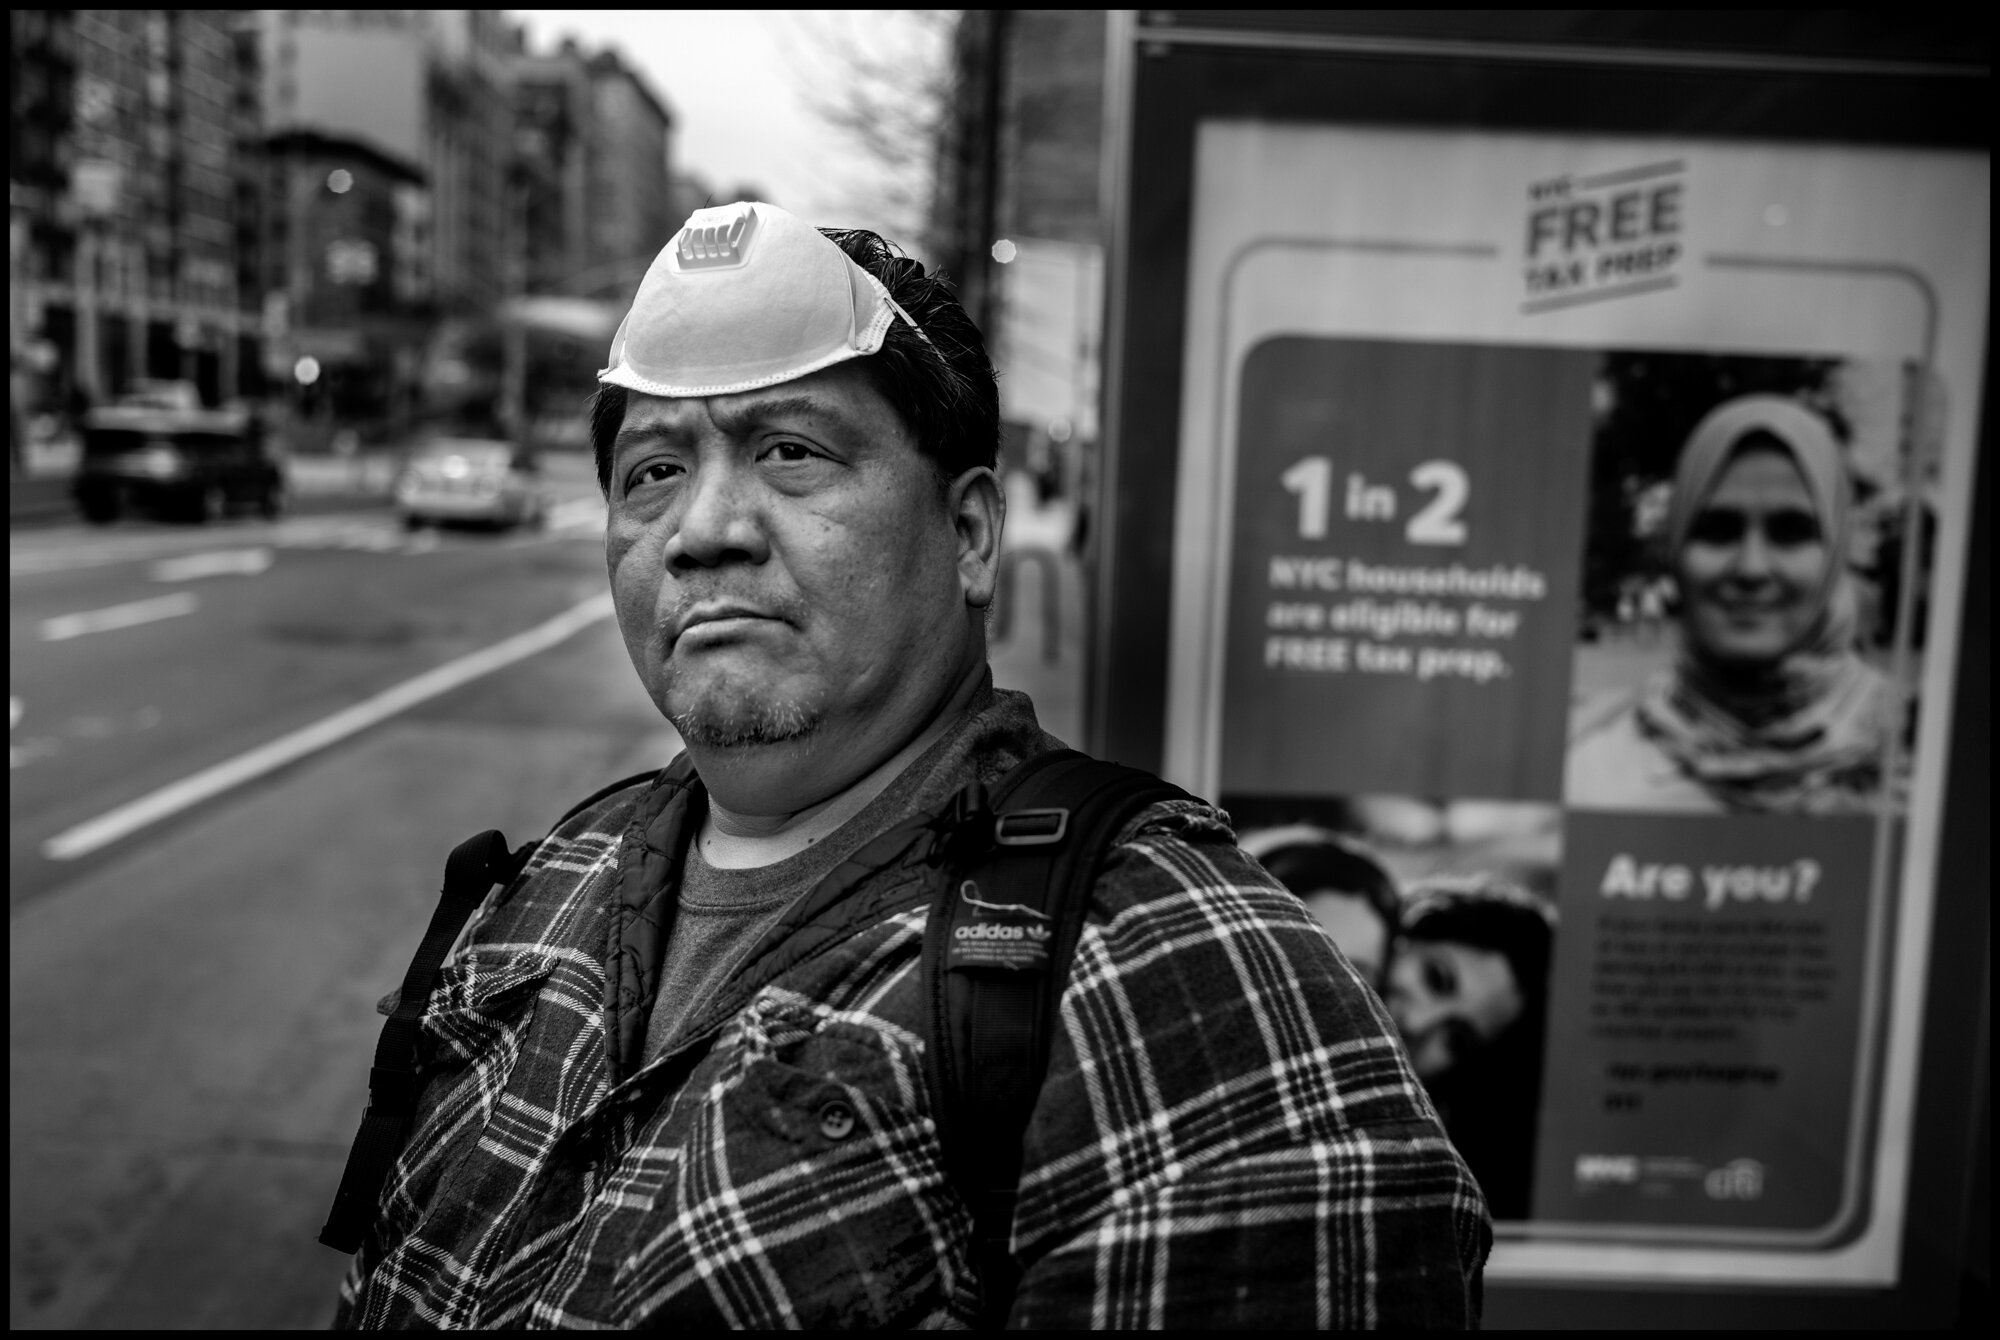  Joe, a doorman originally from Hawaii waits for the bus to take him home to Queens. I worked the all night shift ,and couldn’t take the train at the 96th street stop because he told me a train had caught on fire the night before and the fire killed 